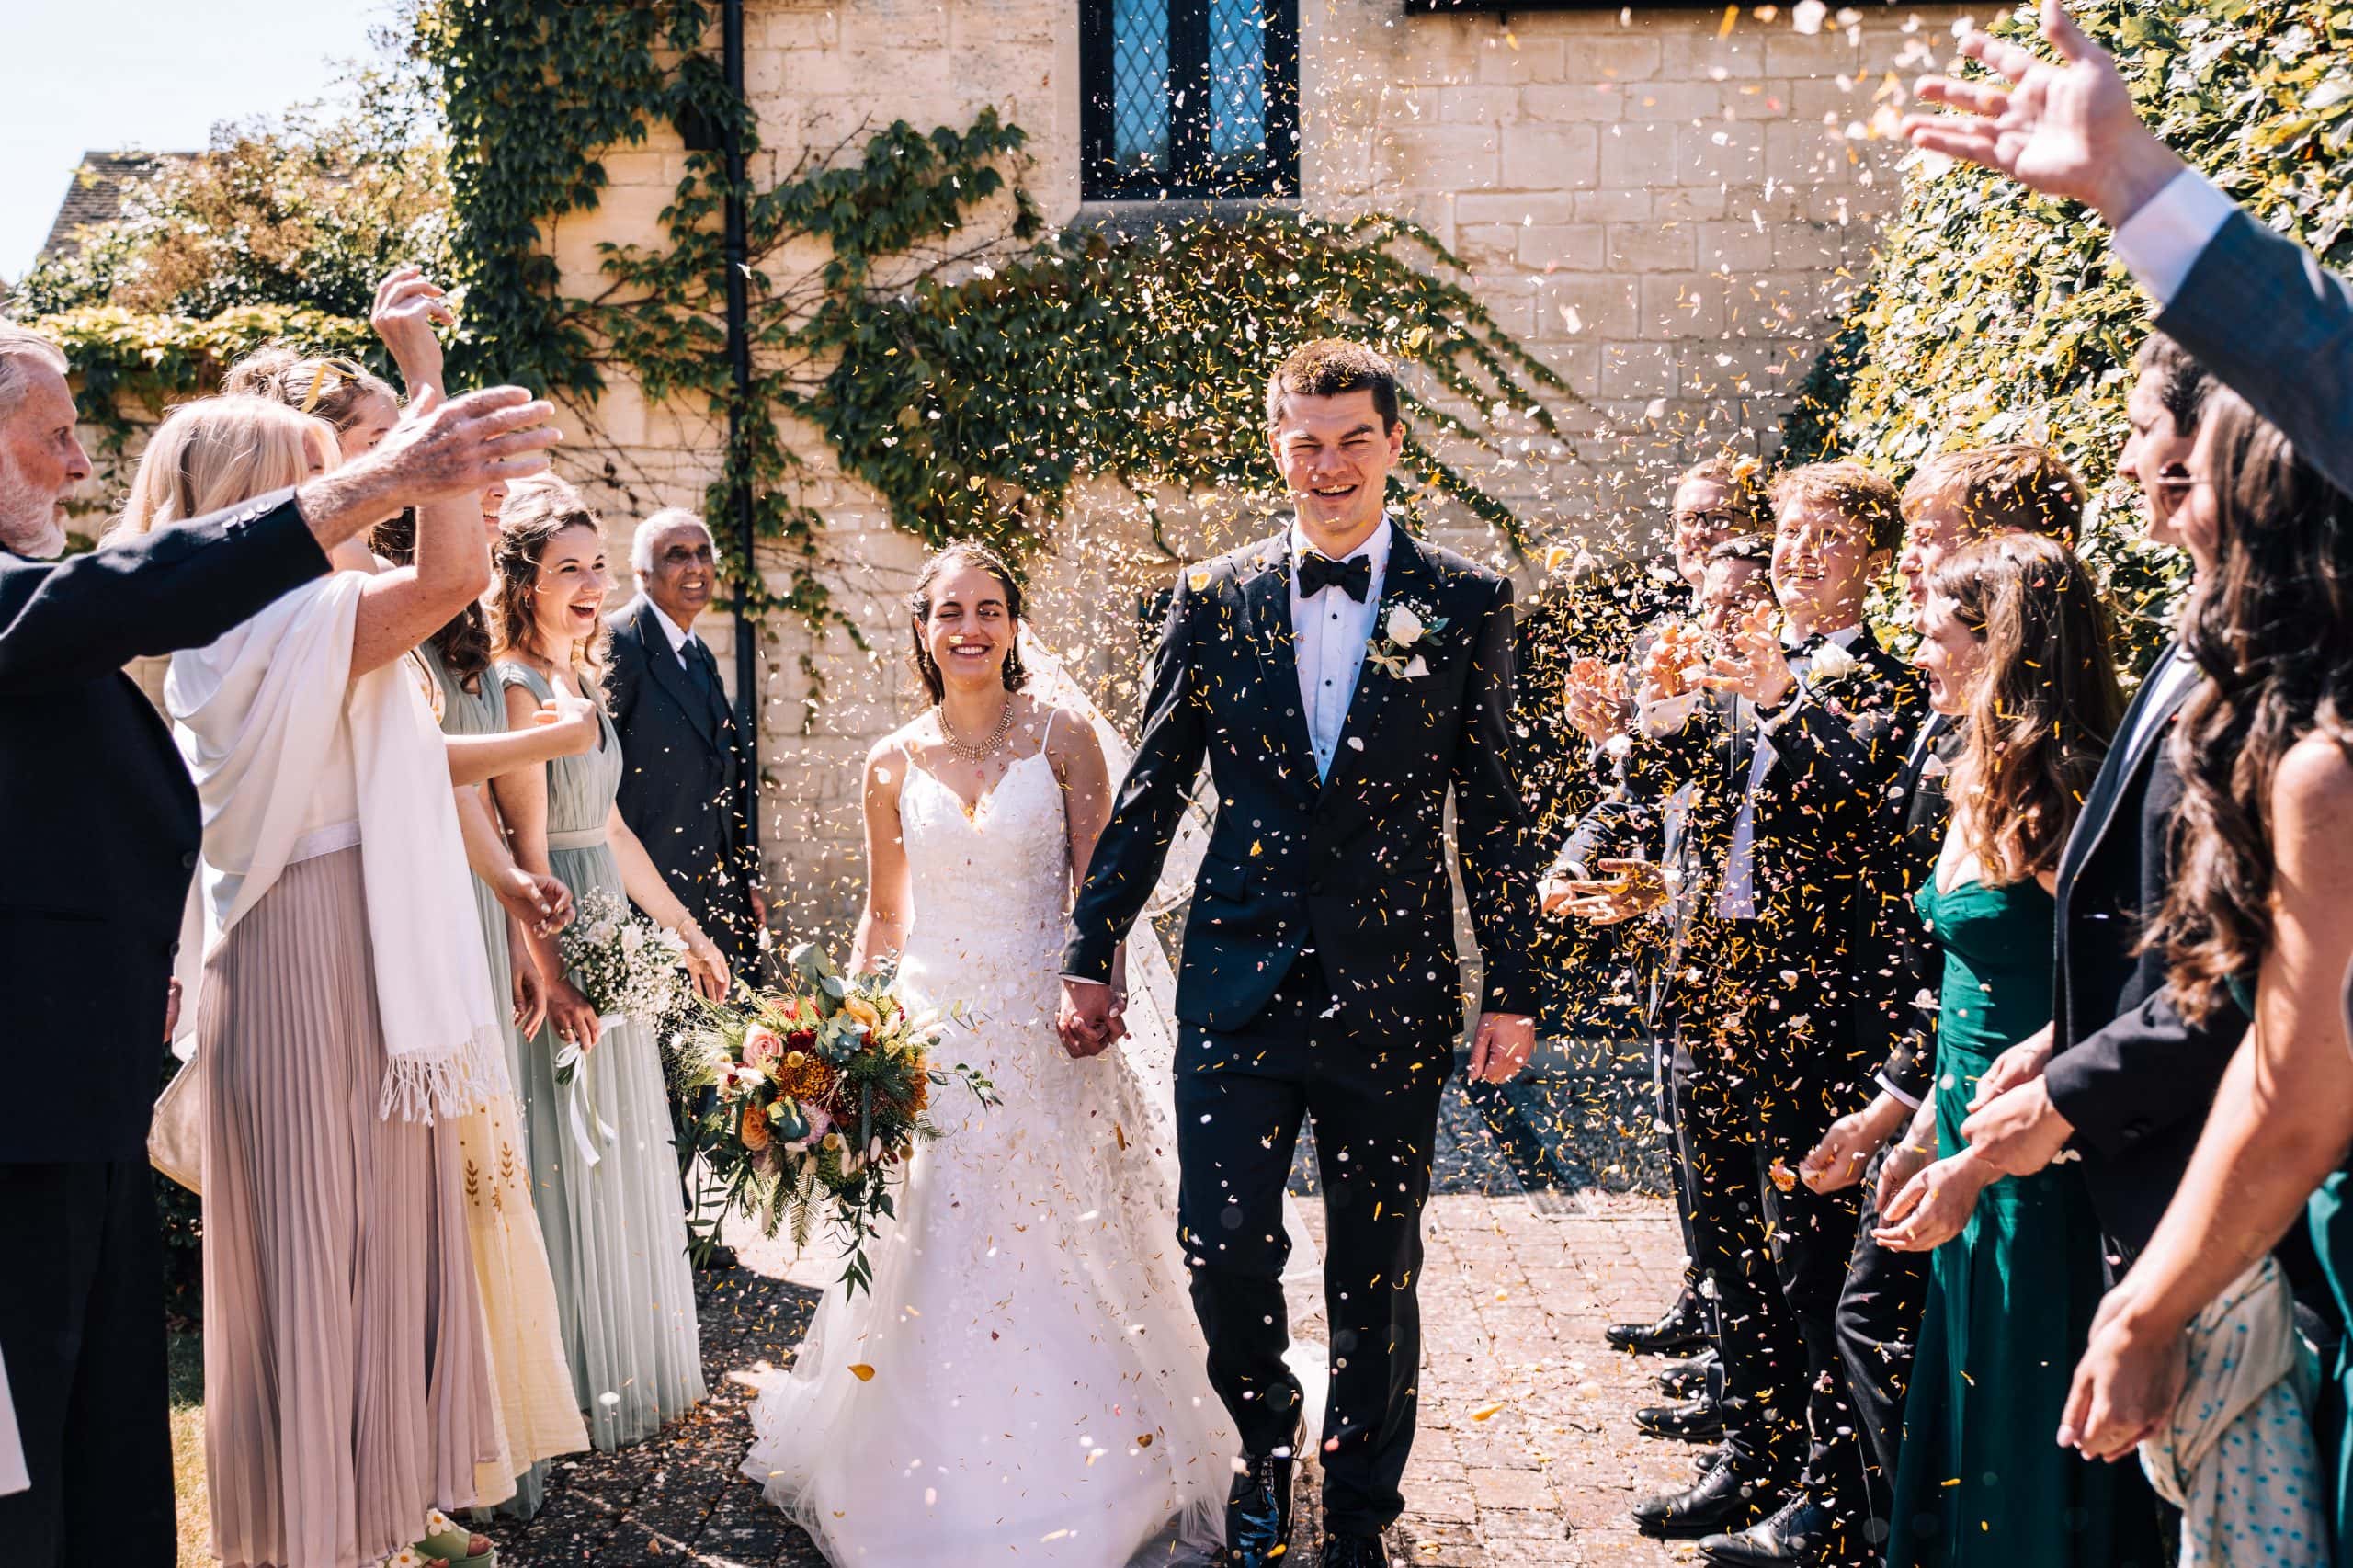 Major throwing of confetti over the bride and groom at Ellenborough Park in Cheltenham